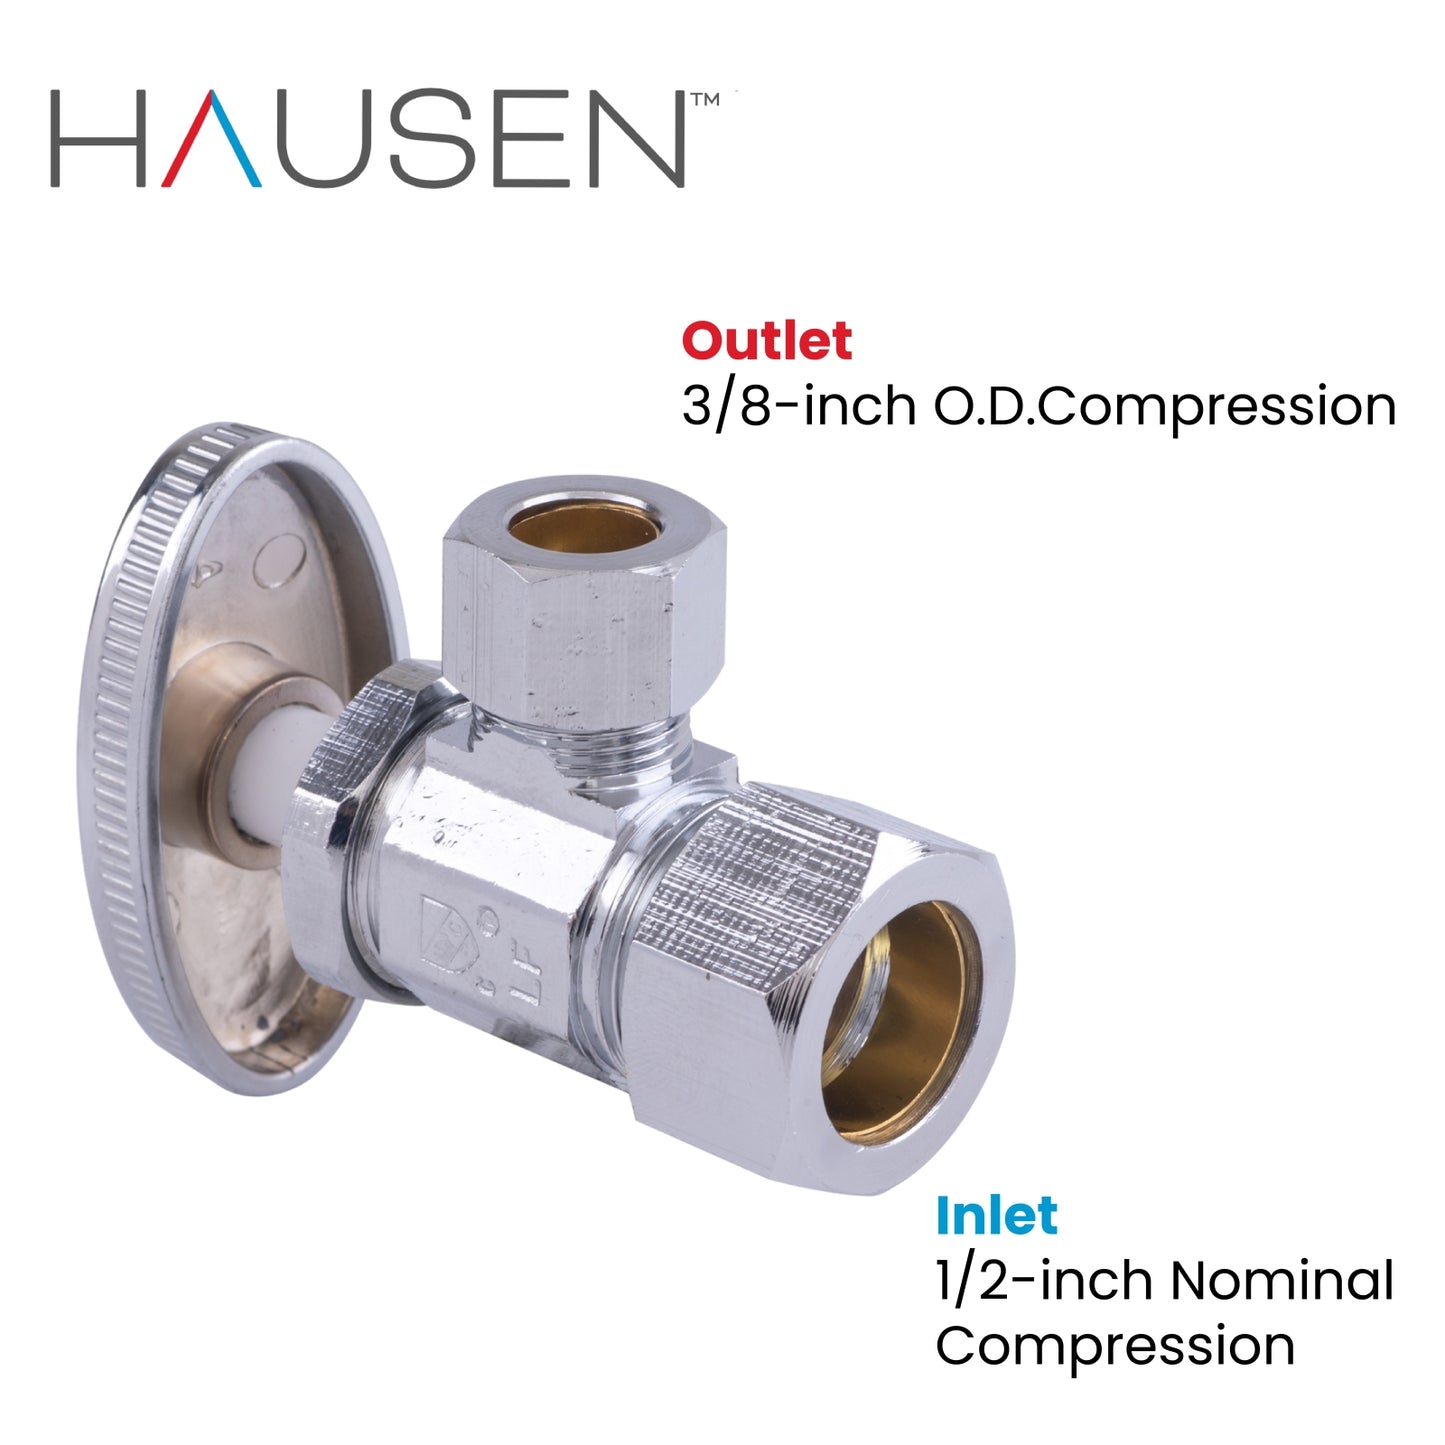 Hausen 1/2-inch Nominal Compression Inlet x 3/8-inch O.D. Compression Outlet Multi-Turn Angle Water Stop; Lead-Free Forged Brass; Chrome-Plated; Compatible with Copper Piping, 10-Pack